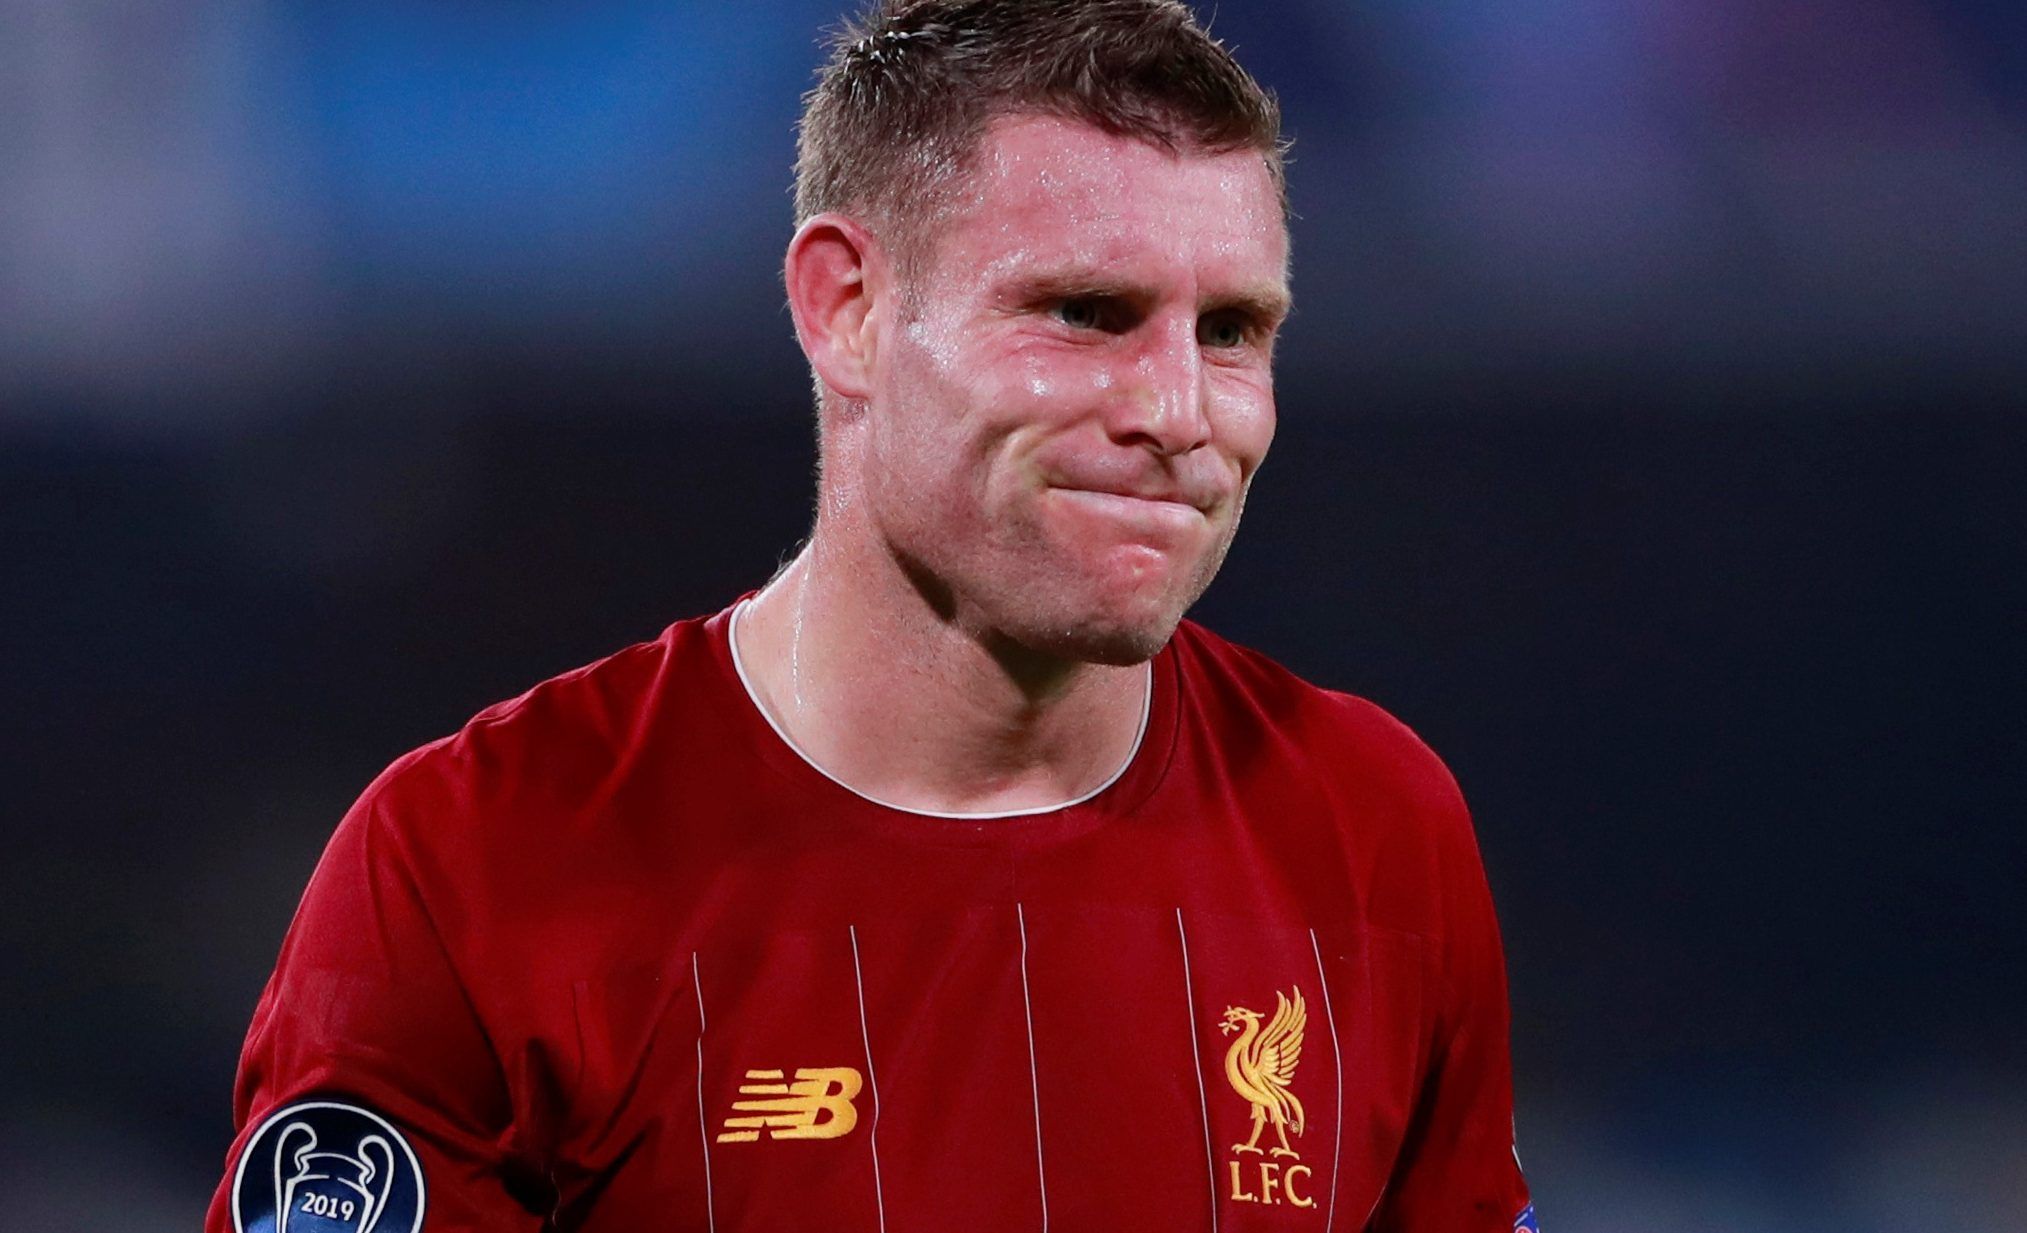 Soccer Football - Champions League - Group E - Napoli v Liverpool - Stadio San Paolo, Naples, Italy - September 17, 2019  Liverpool's James Milner reacts               Action Images via Reuters/Andrew Couldridge